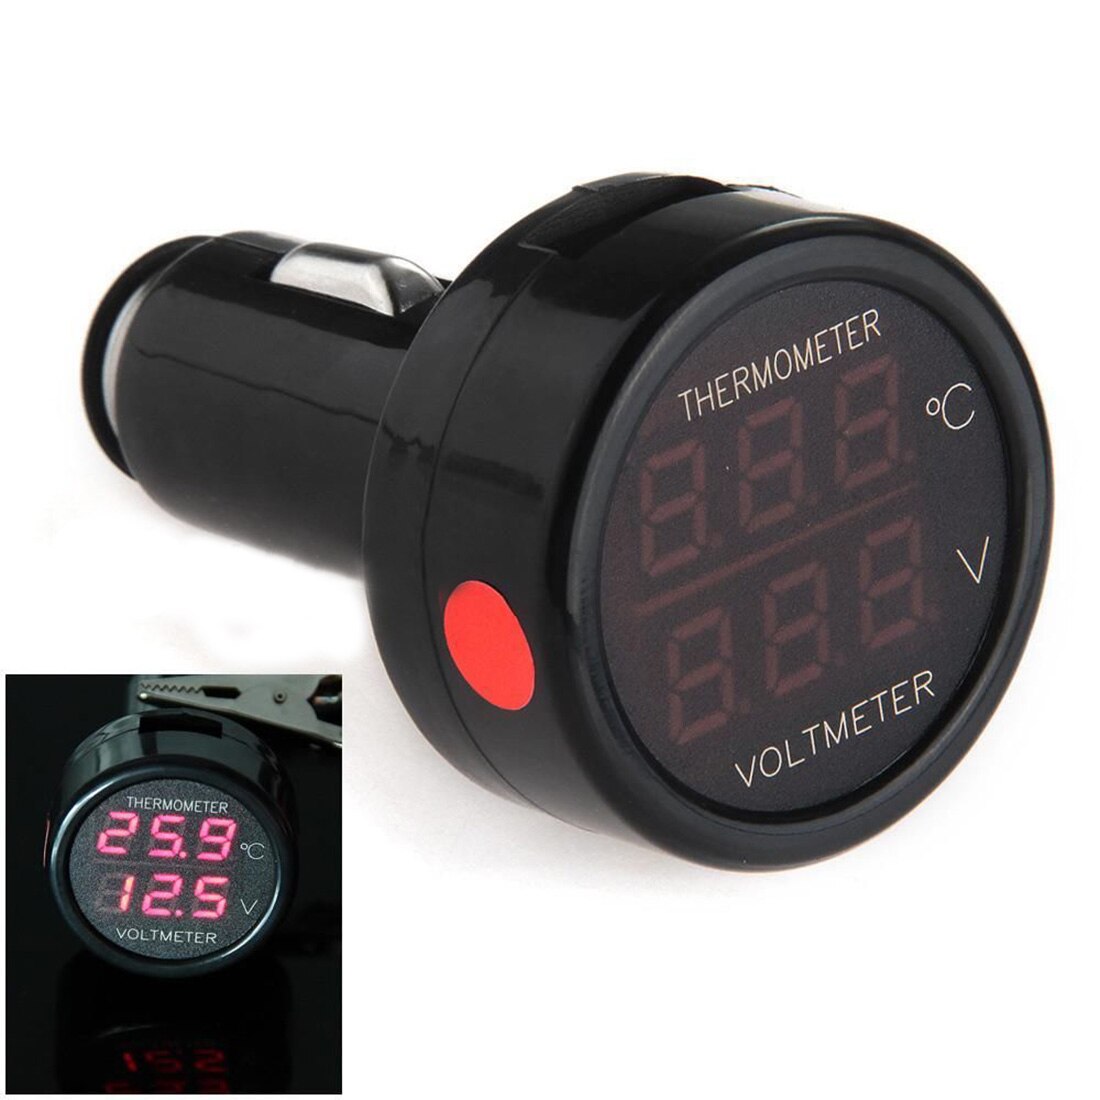 2 In 1 Auto Battery Monitor Voltmeter Thermometer DF-01-TV Digit Display Rood Groen Blauw Auto Voltmeter 7.2*3.8 Cm